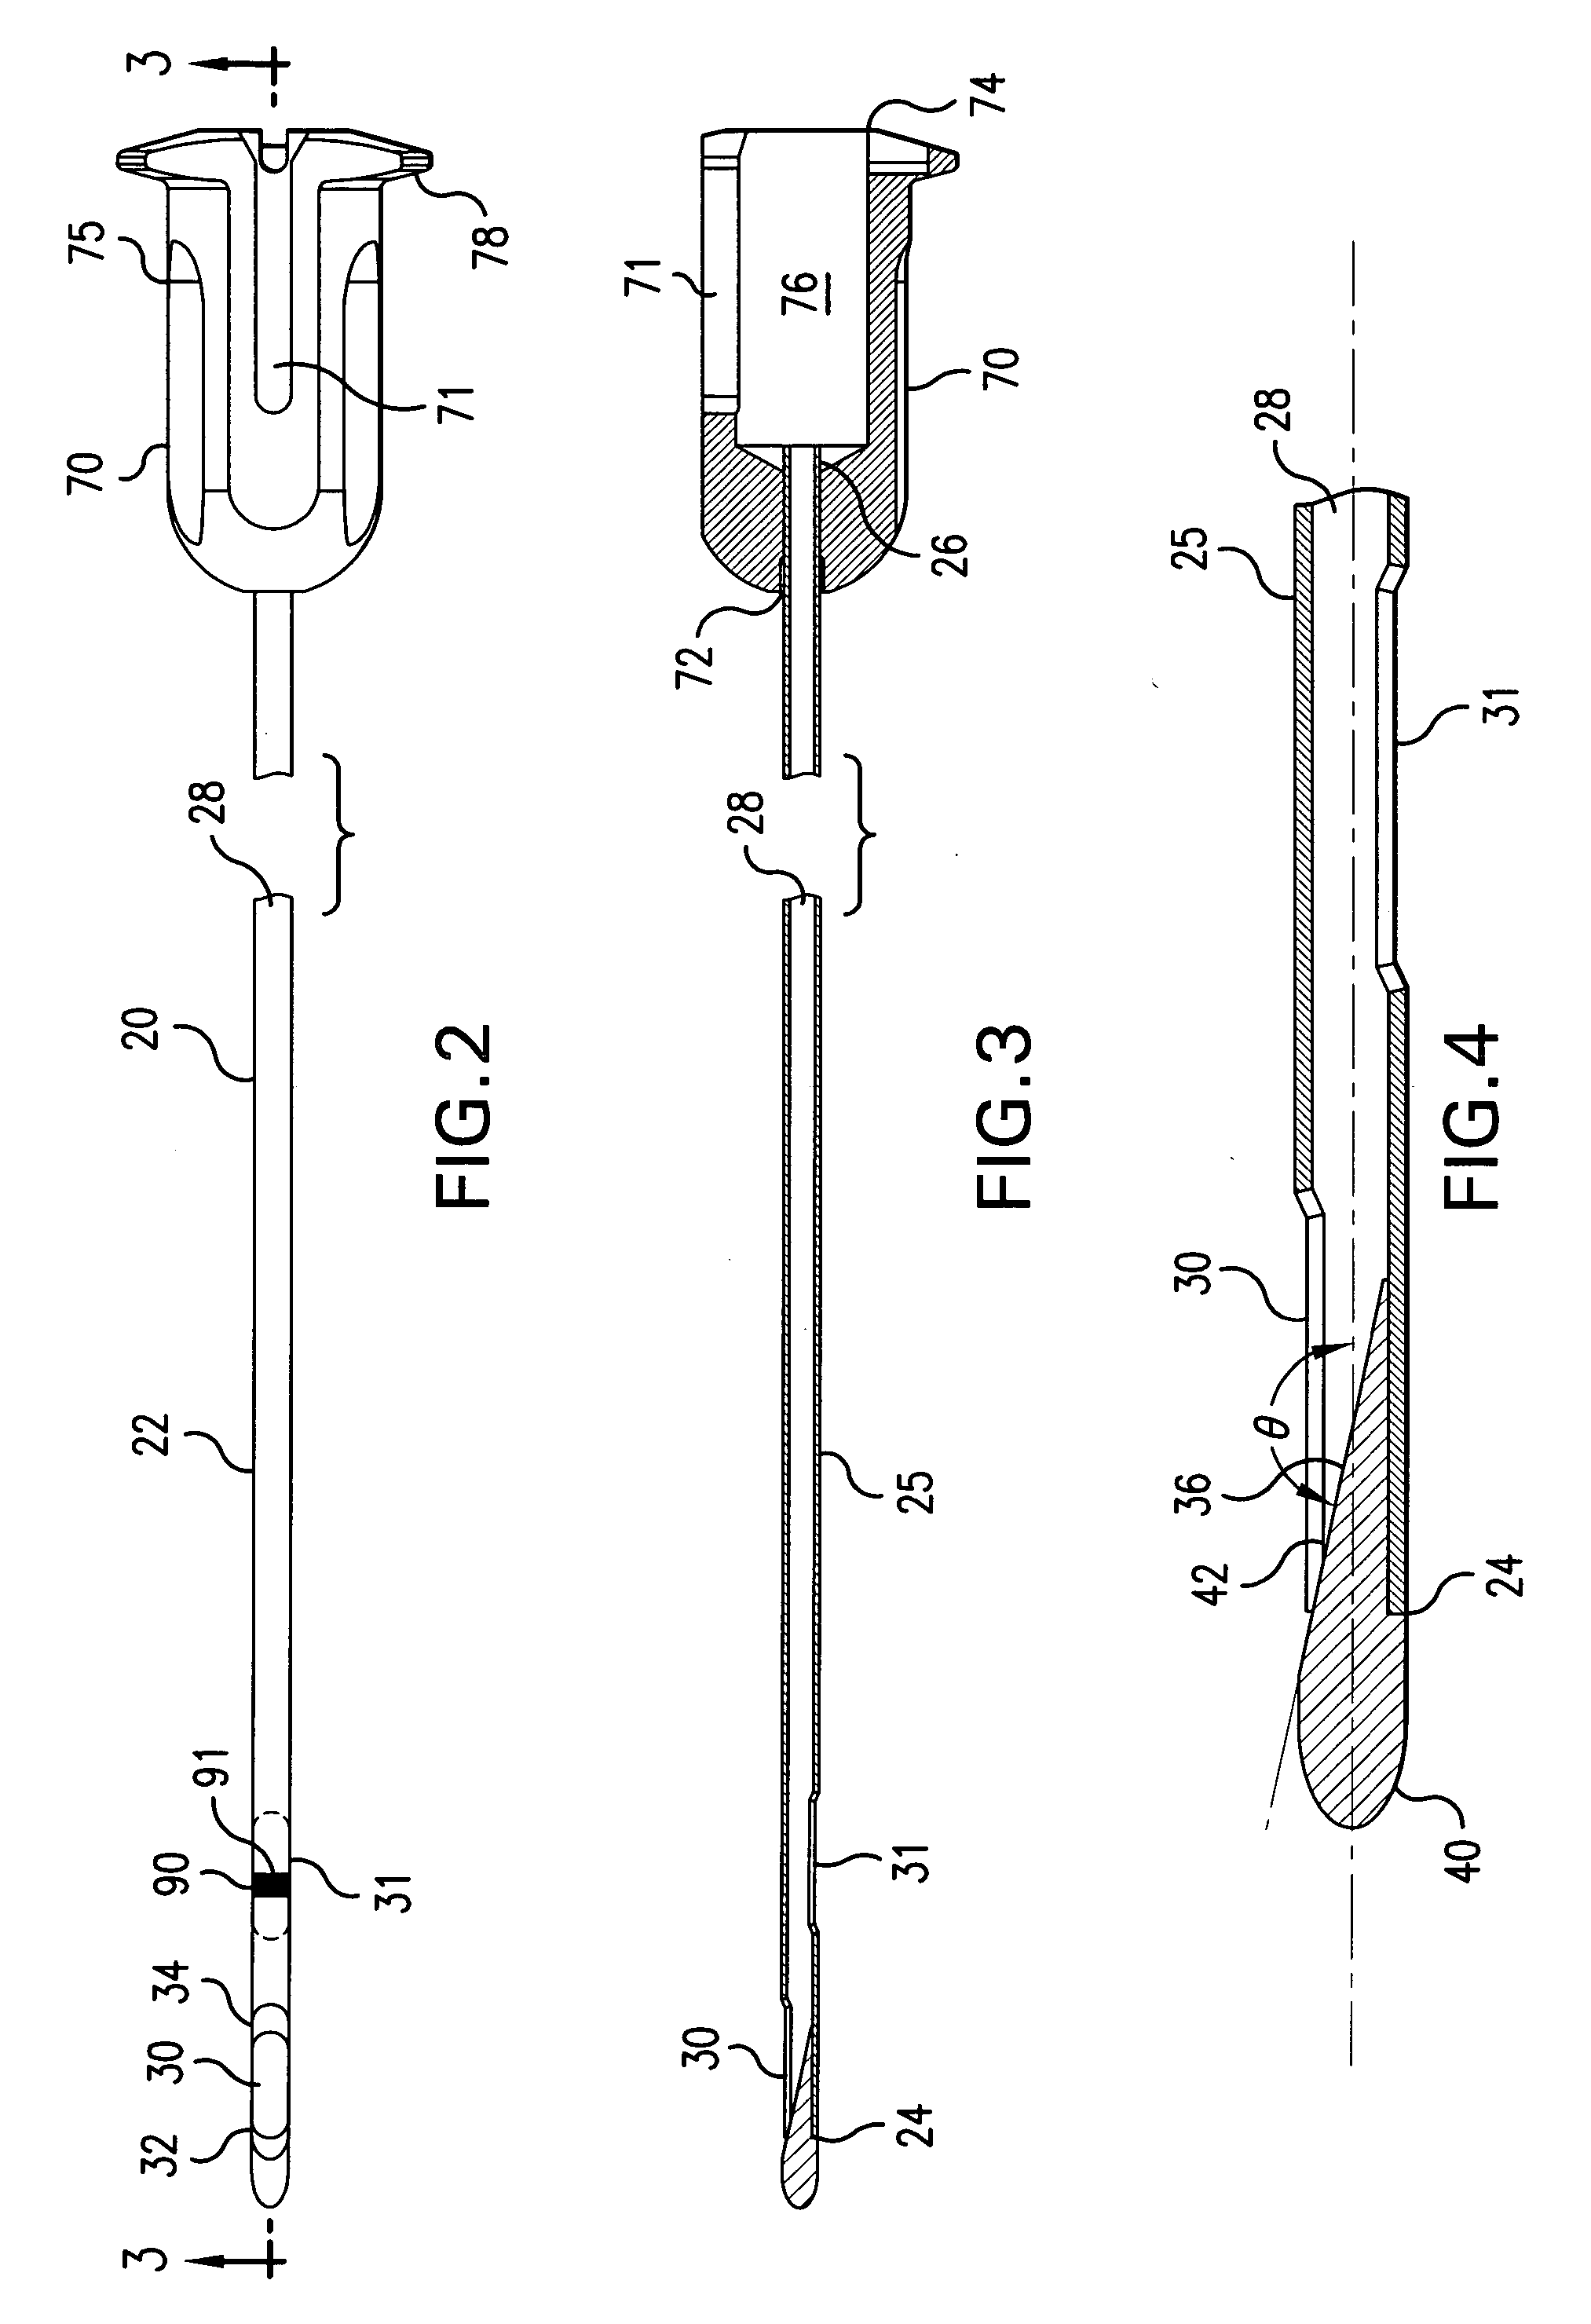 Implant positioning system and method